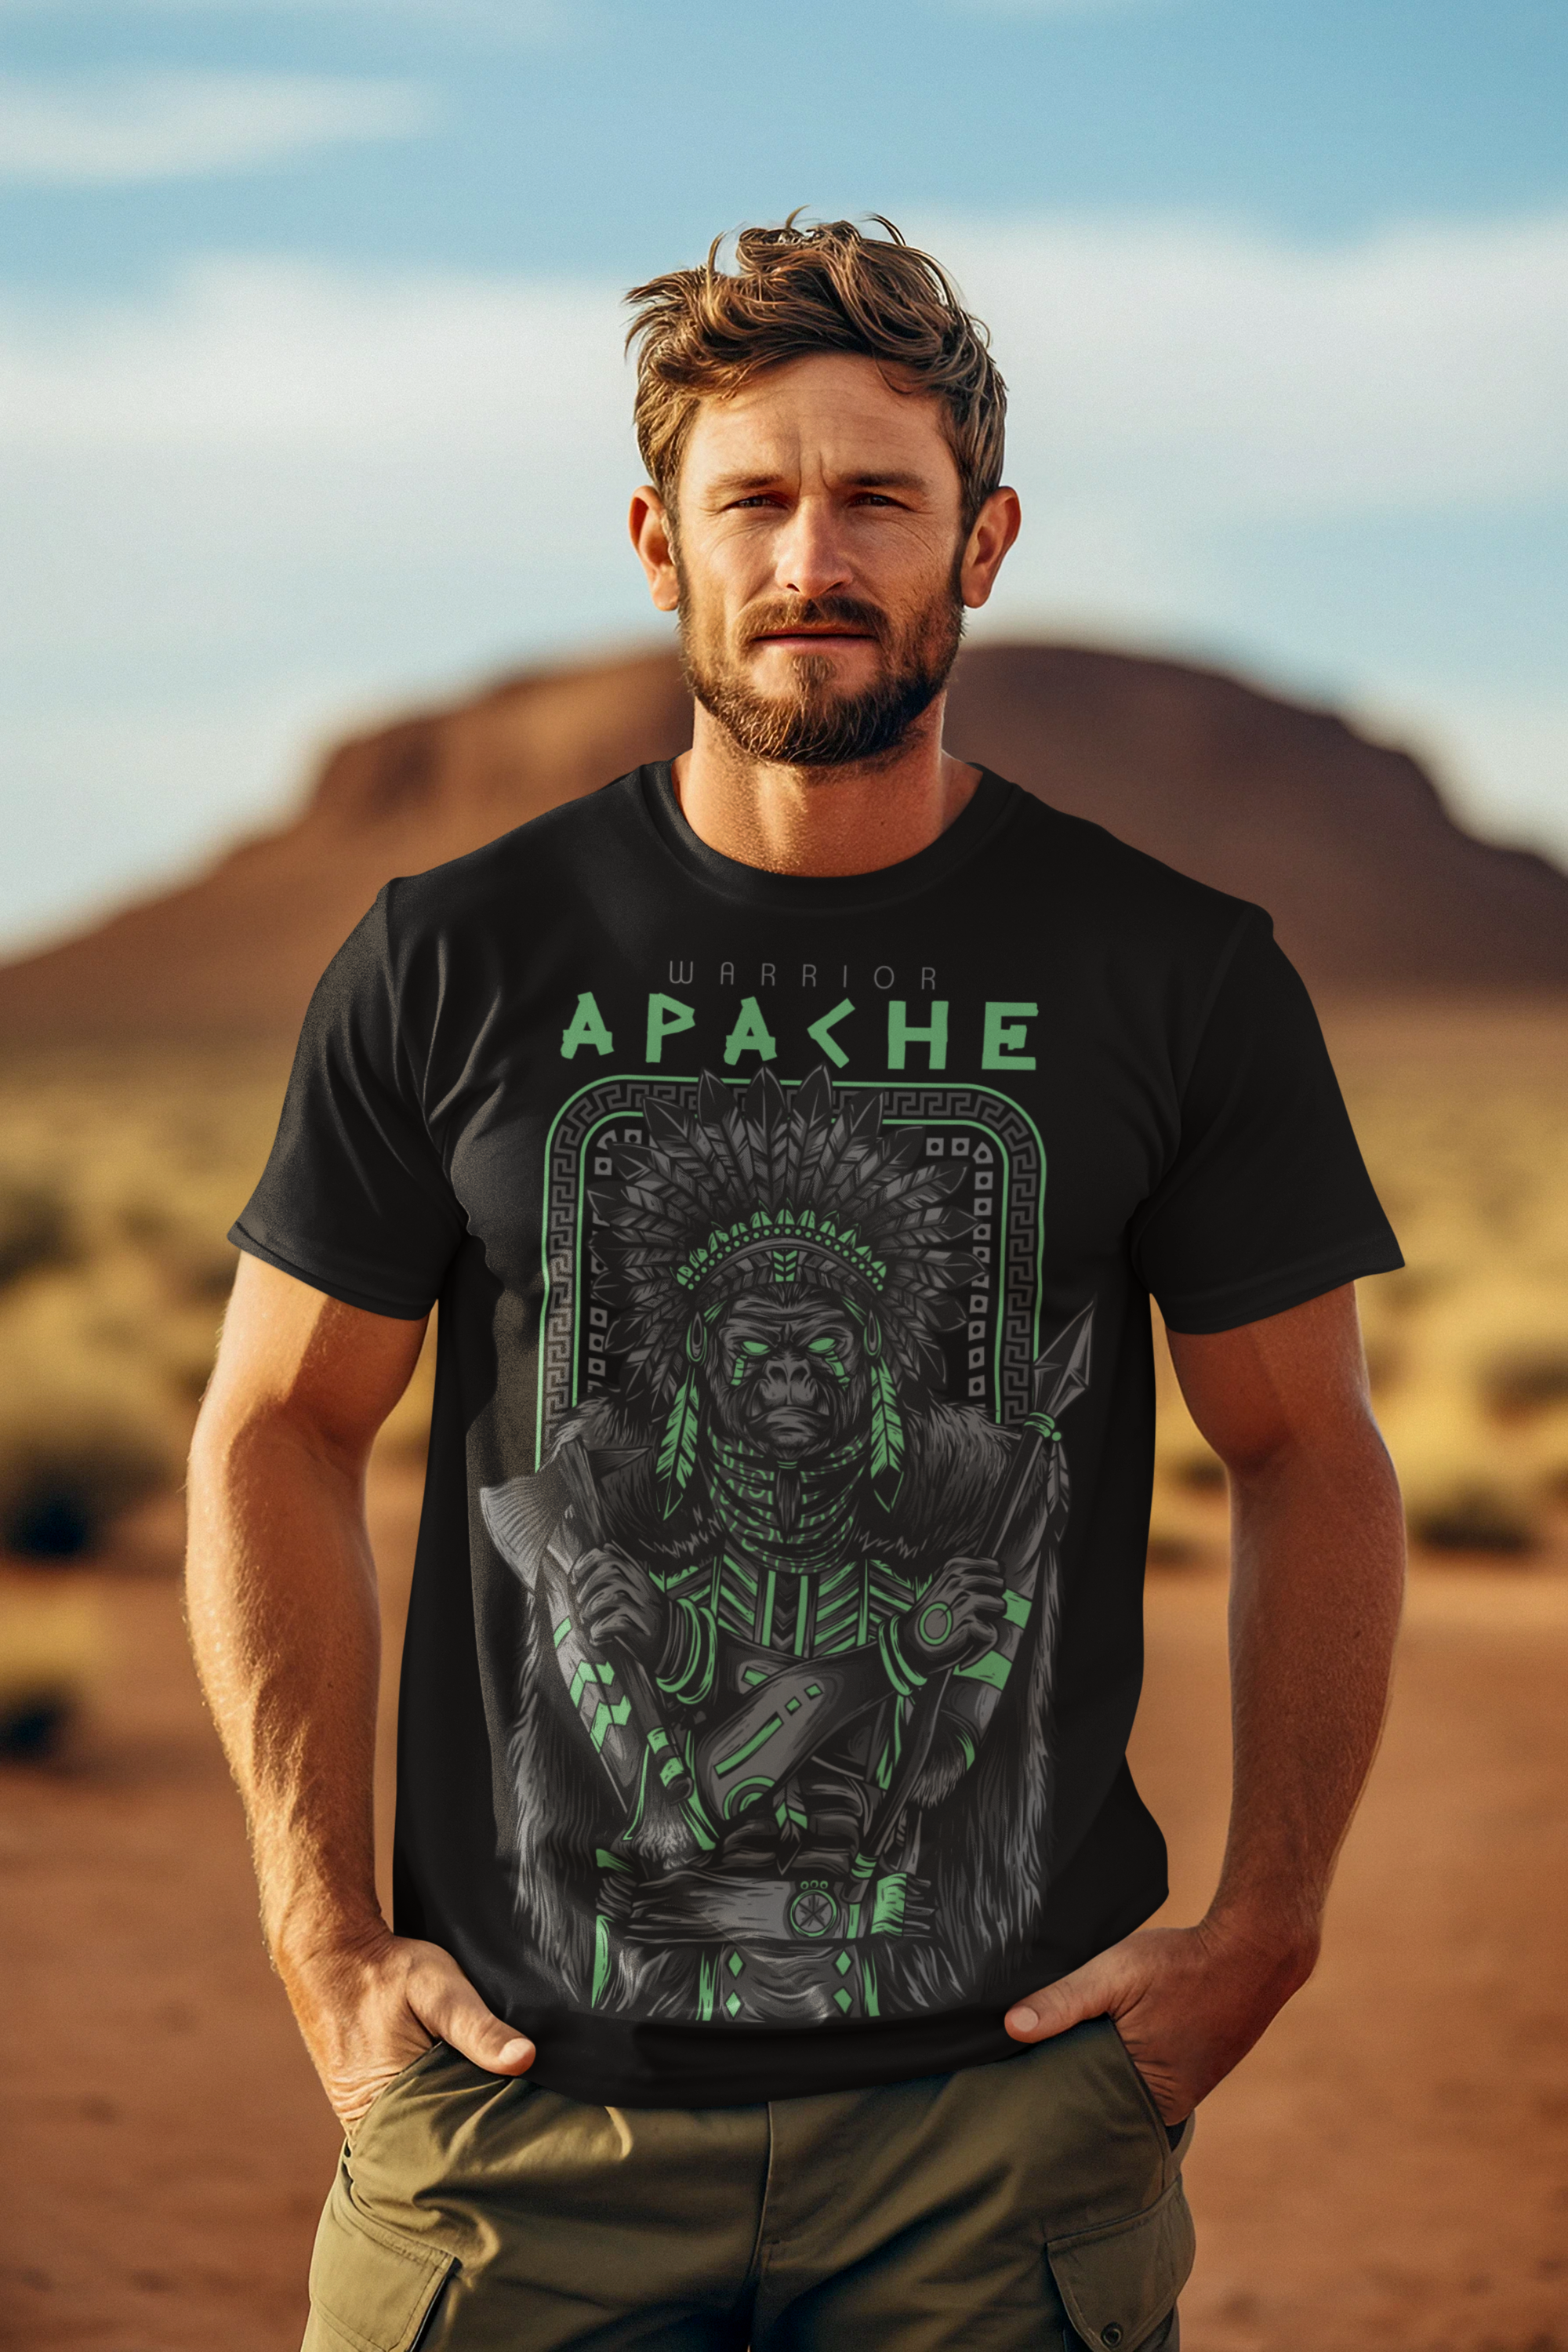 Unleash Your Inner Warrior with the Black Apache Warrior Shirt